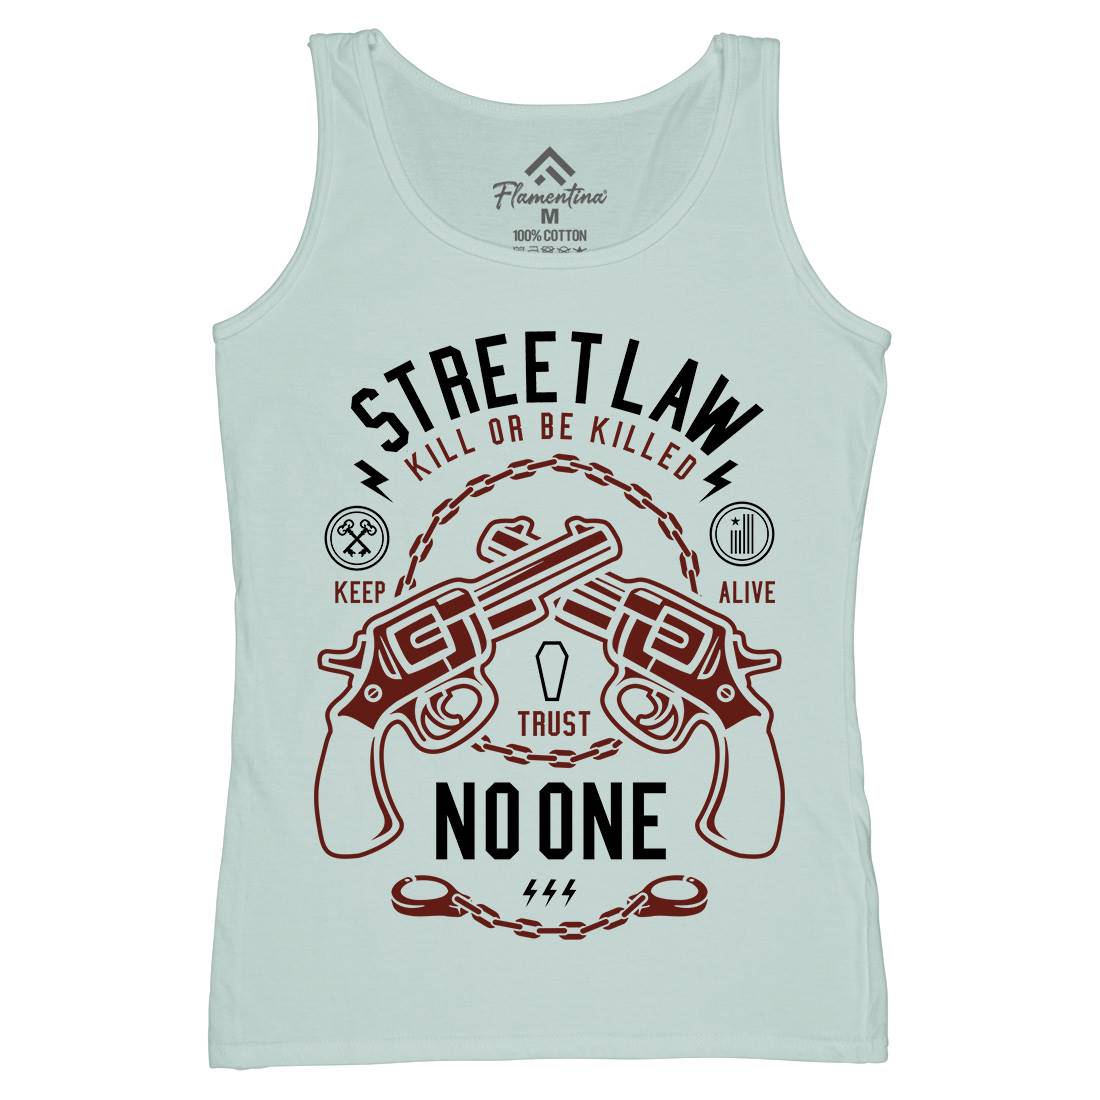 Street Law Womens Organic Tank Top Vest Quotes A286